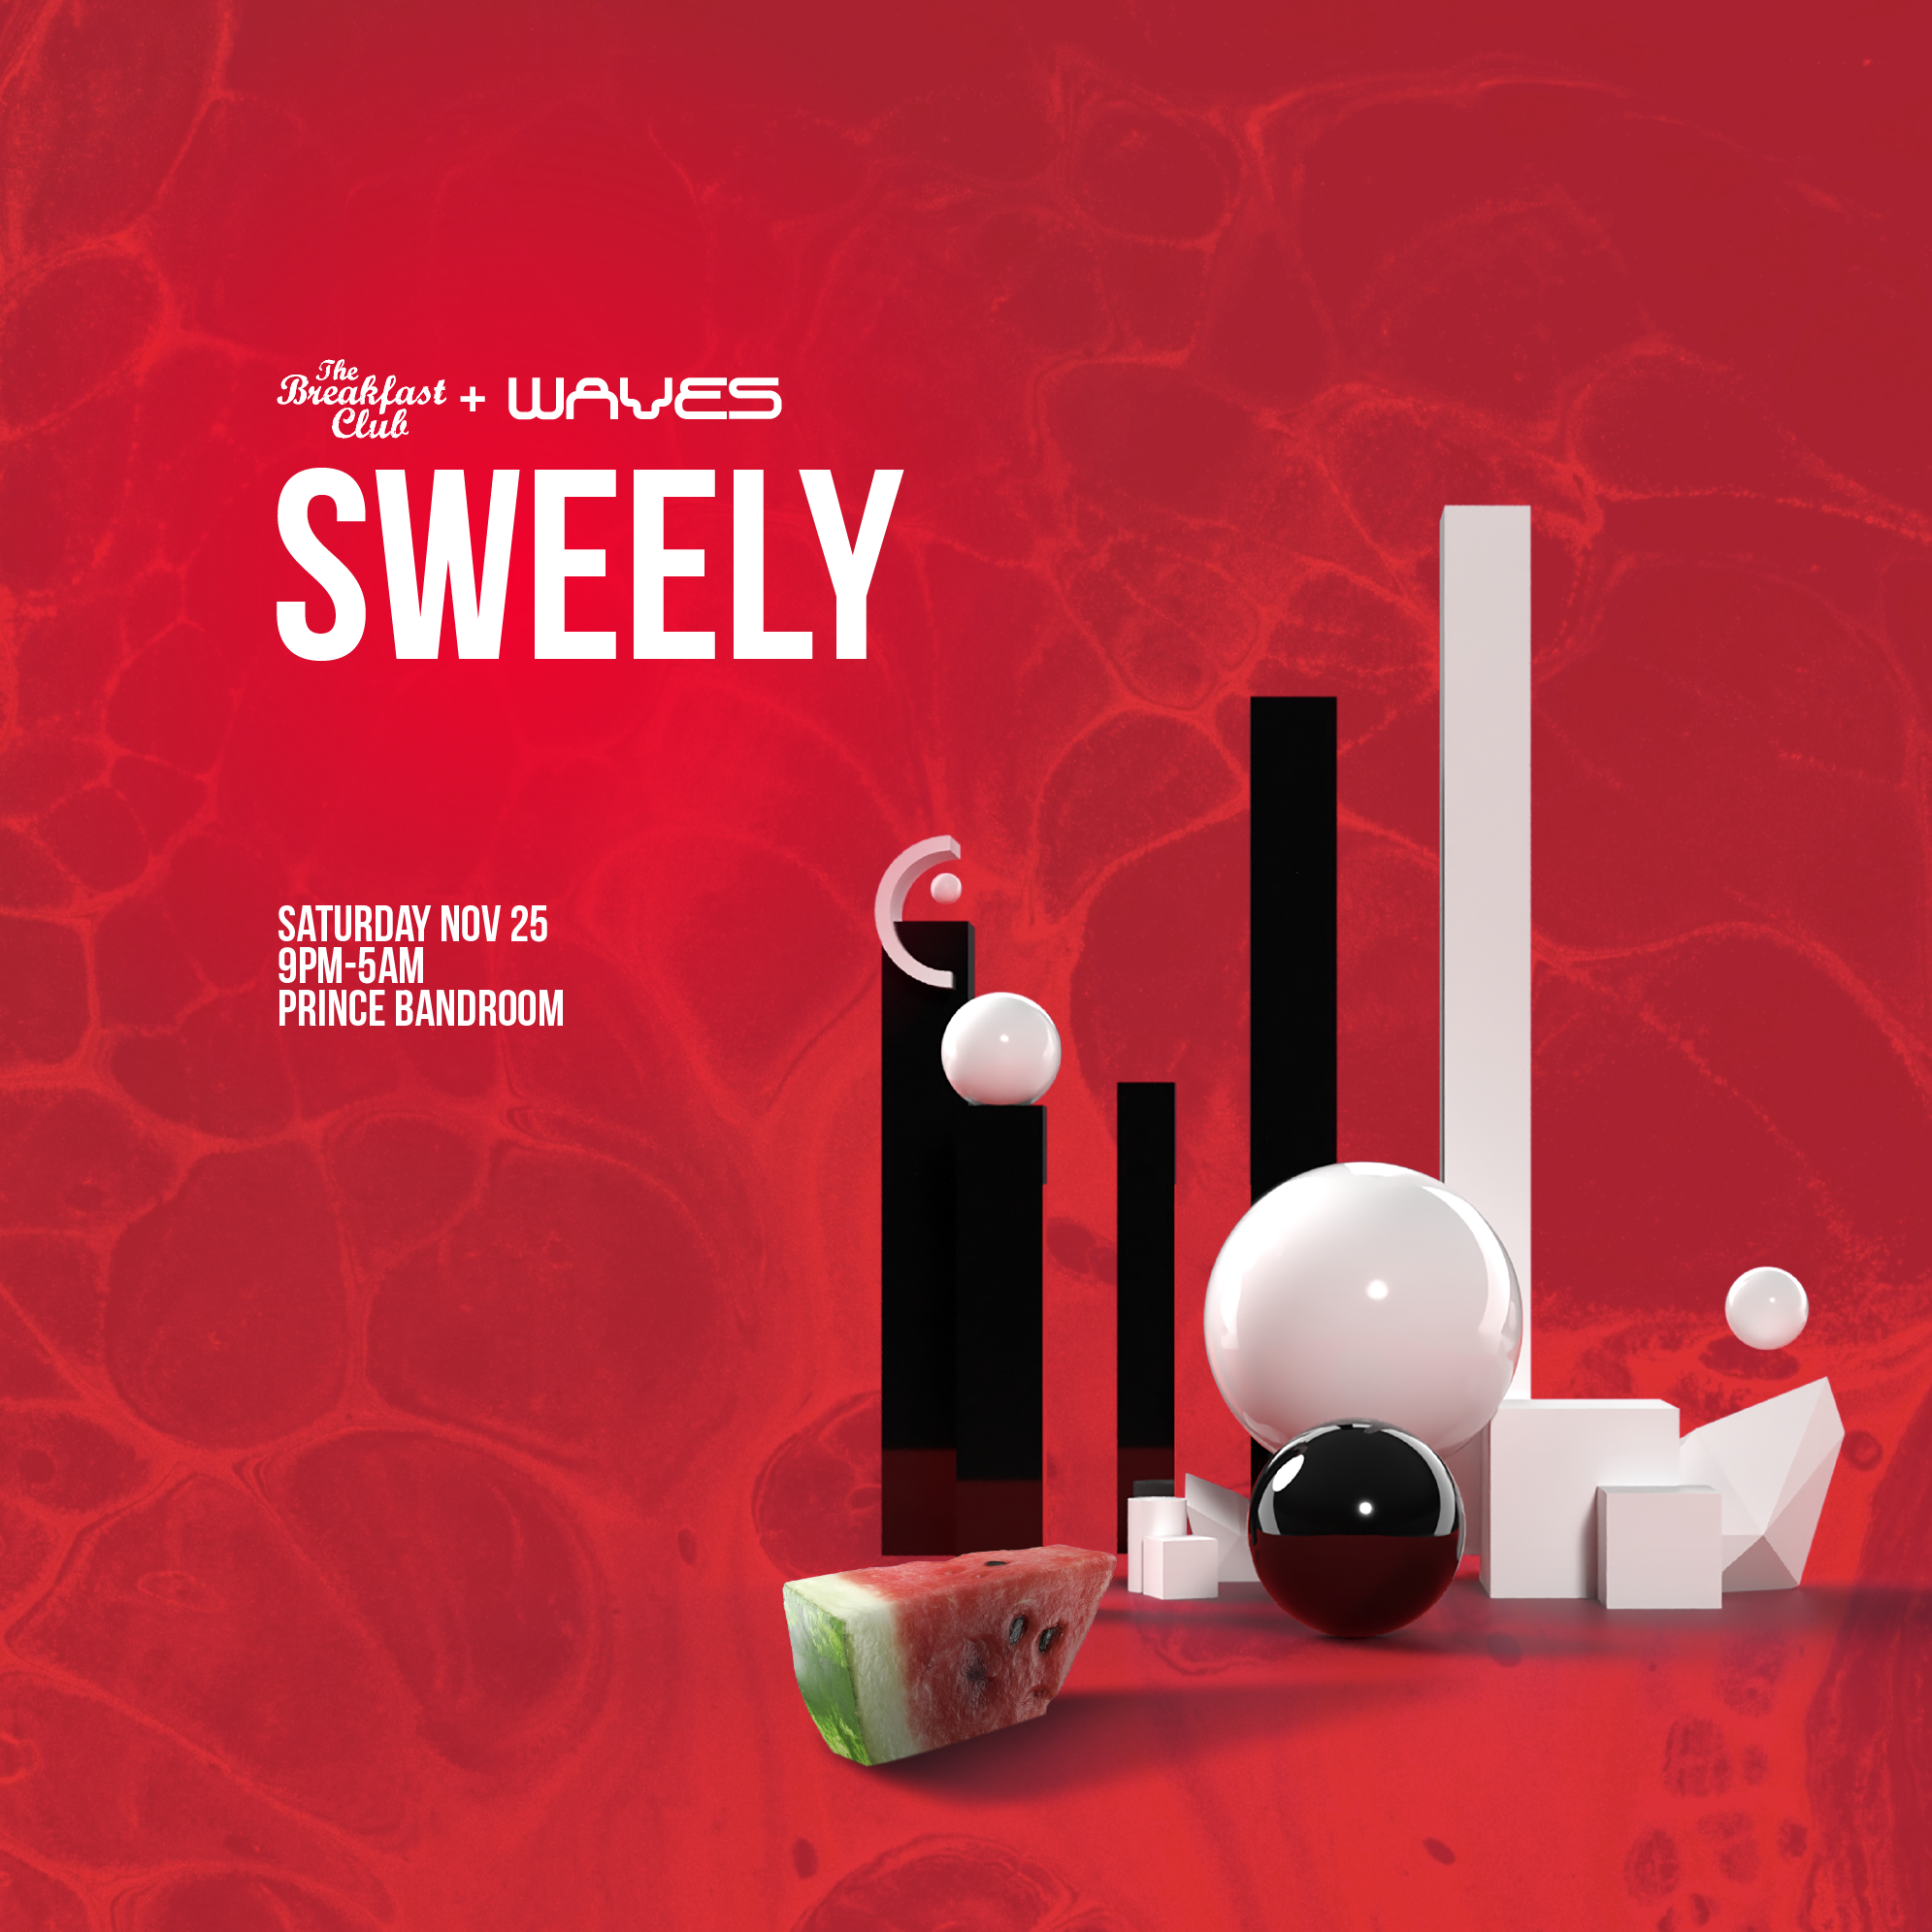 Sweely (FRA) presented by The Breakfast Club + Waves - Página frontal